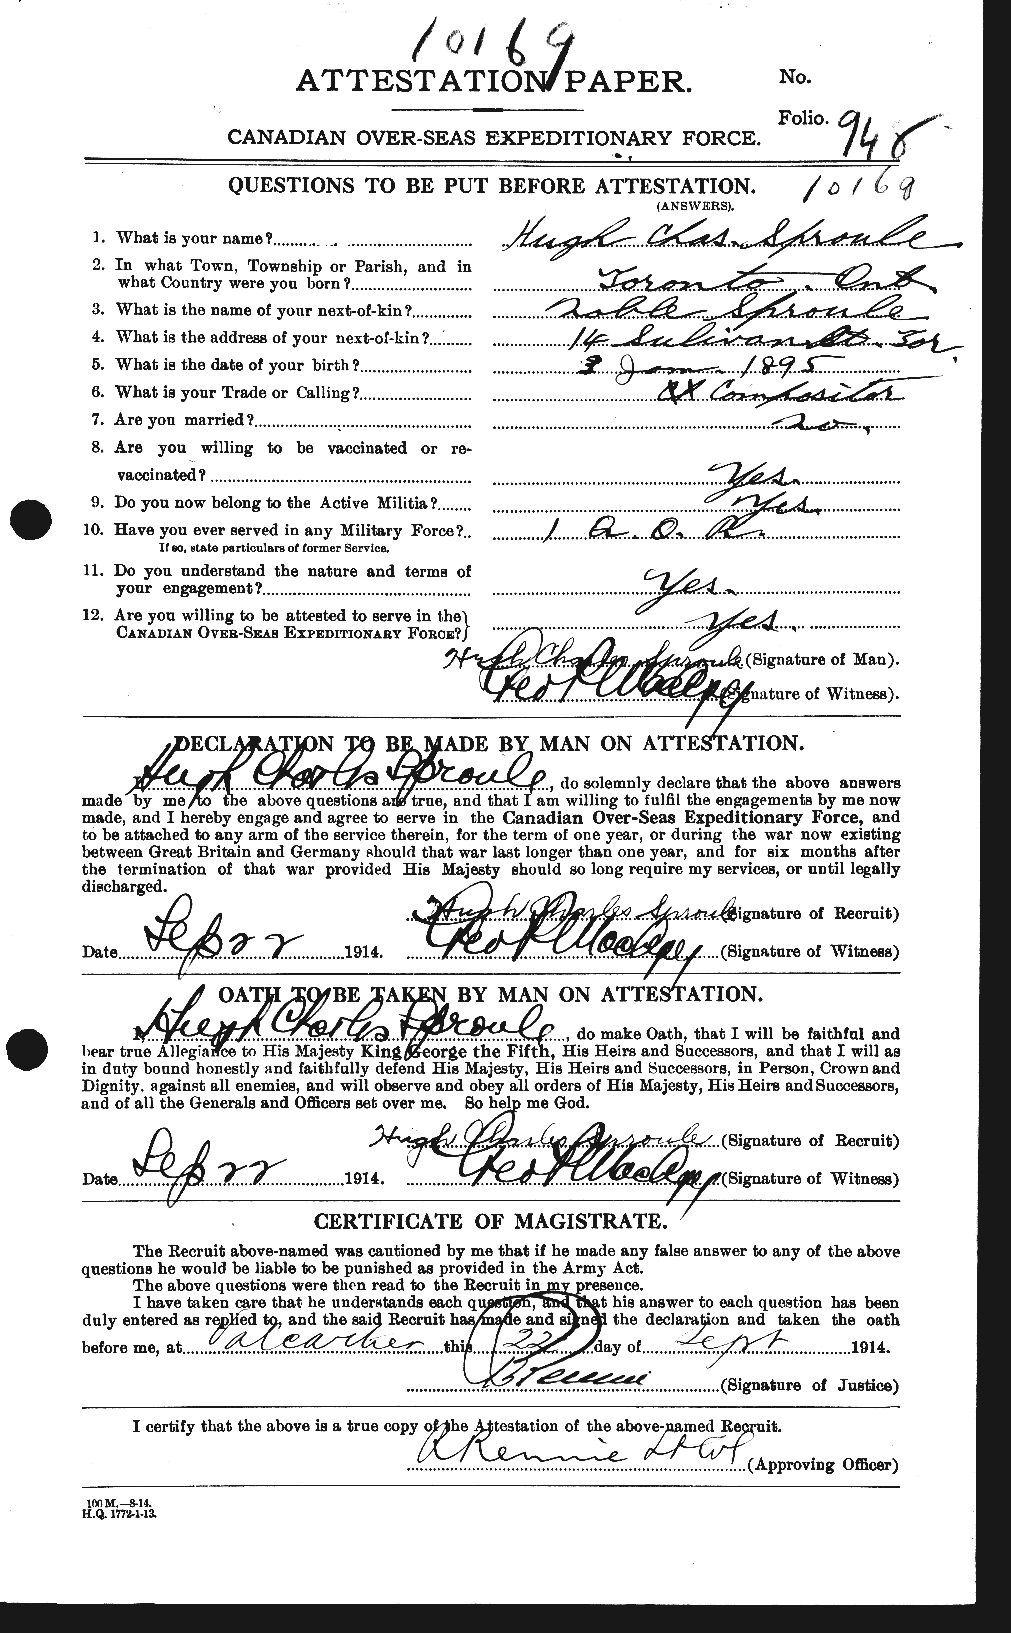 Personnel Records of the First World War - CEF 111927a